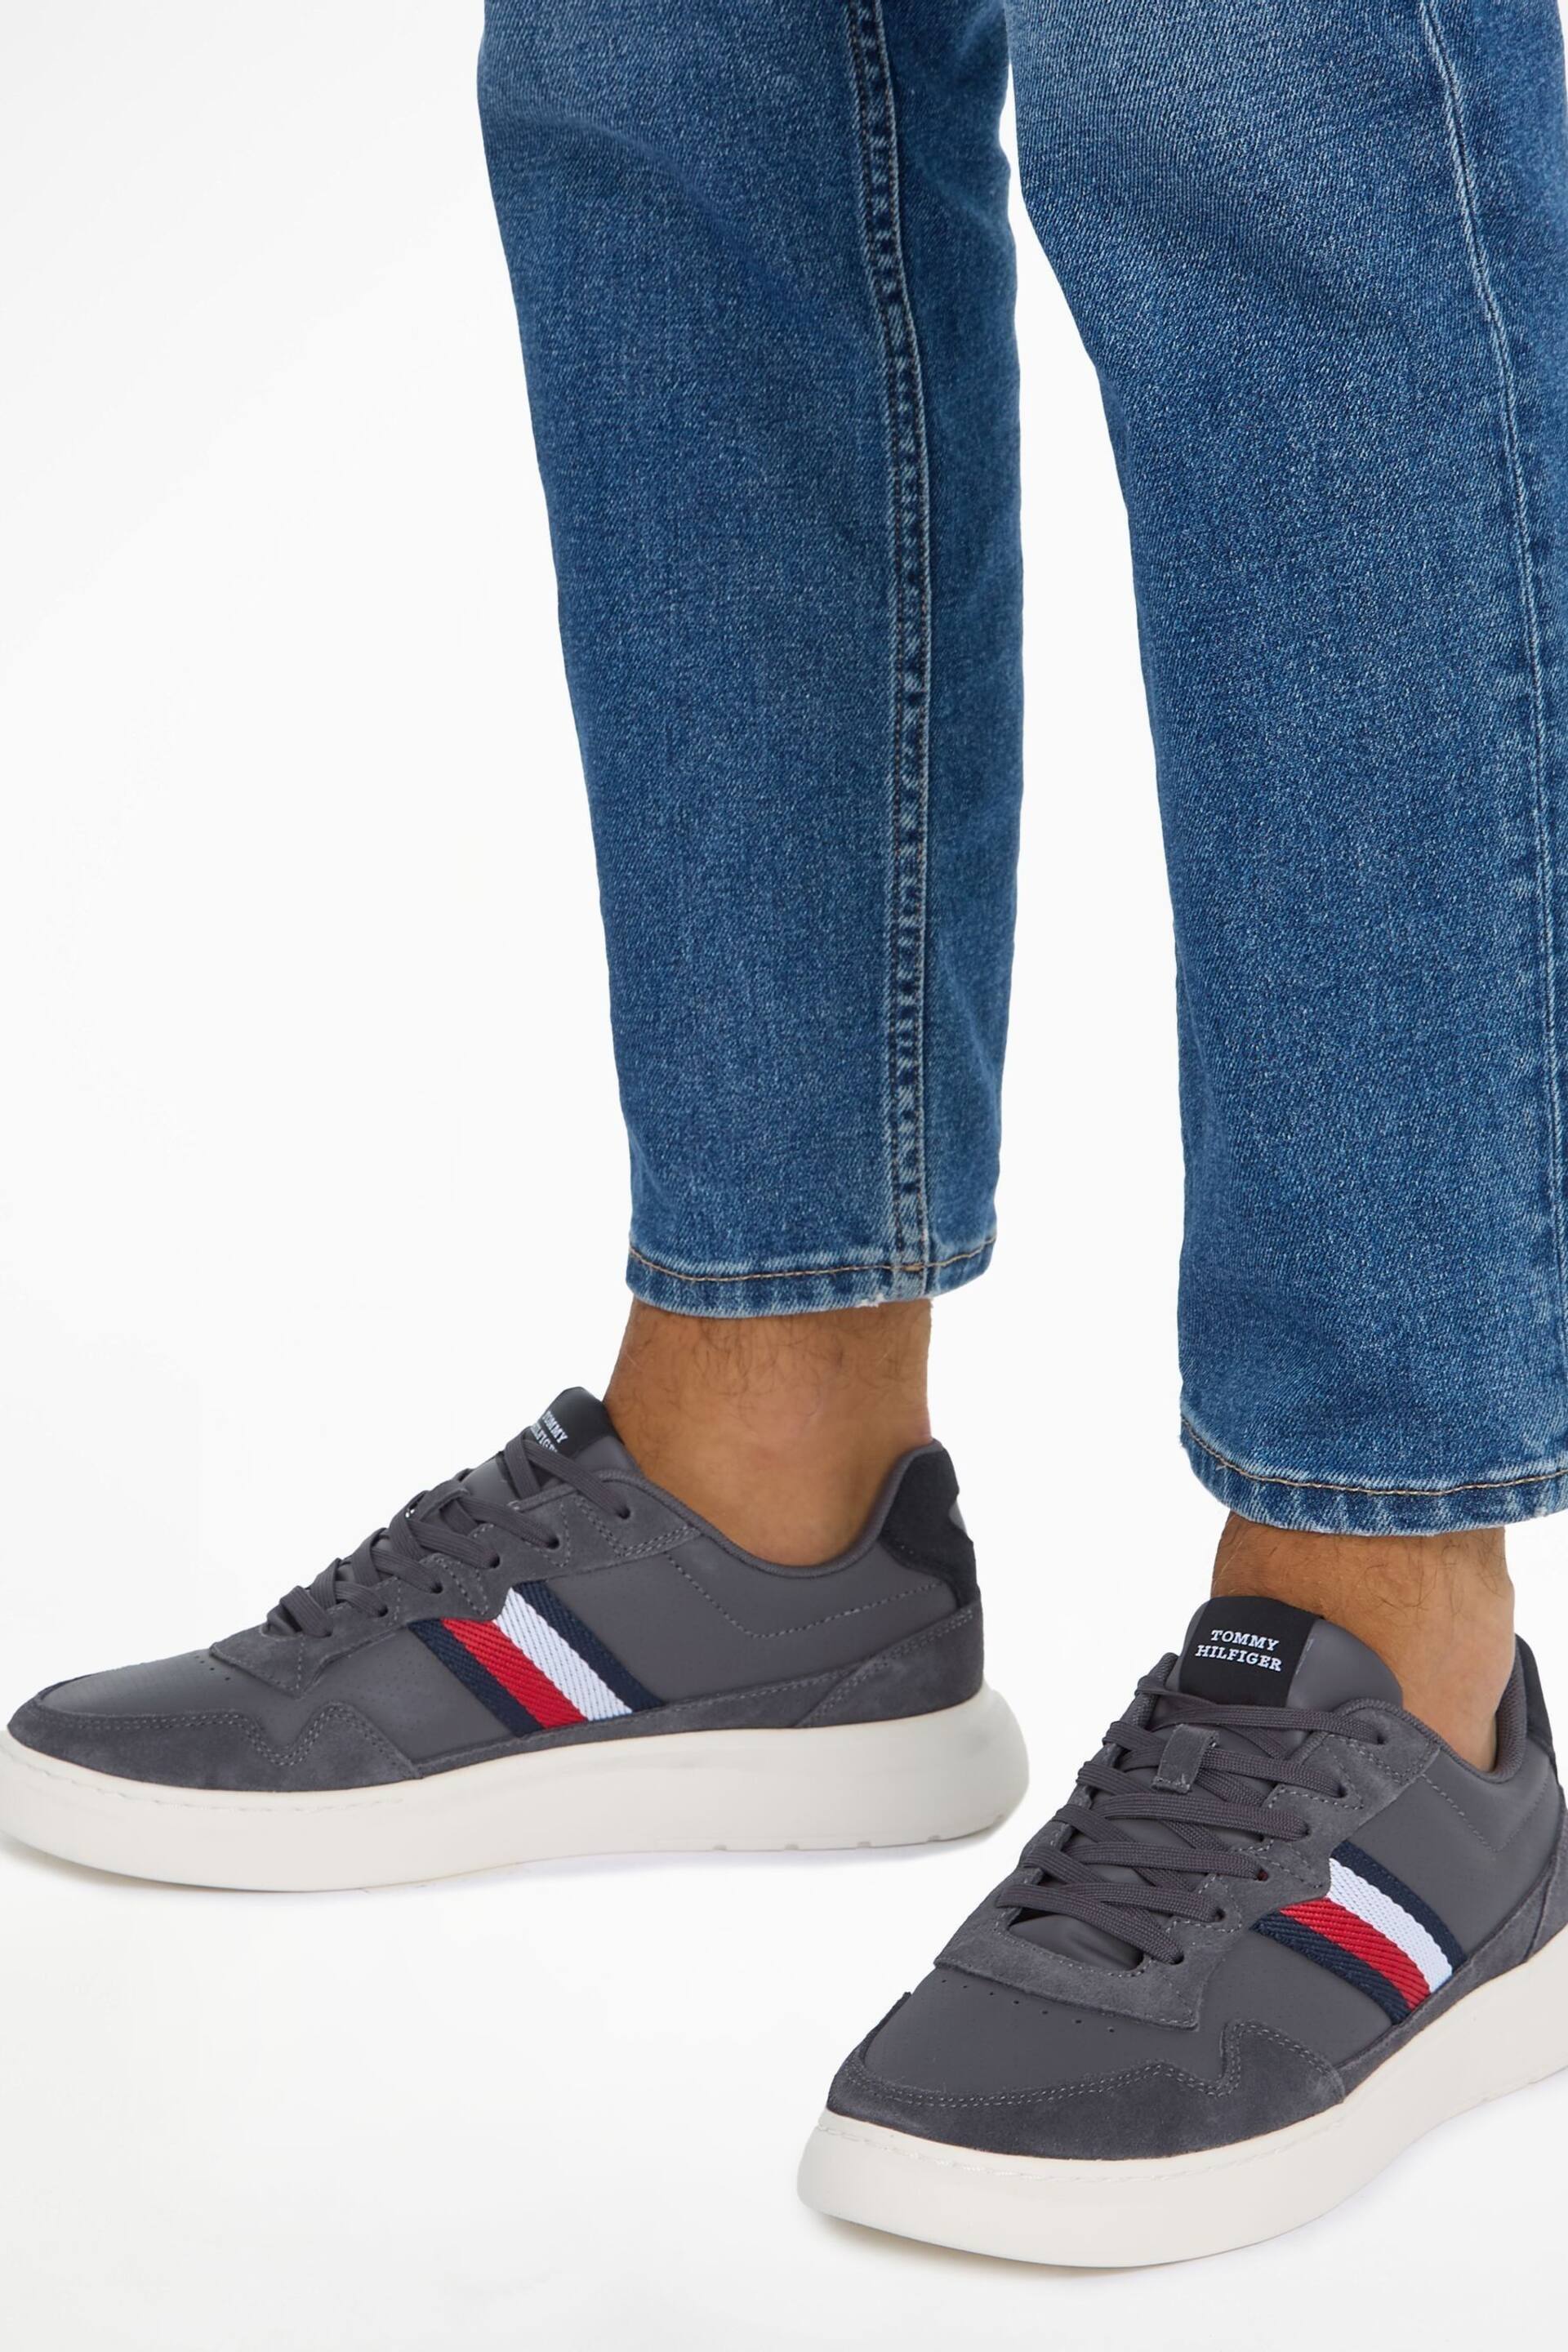 Tommy Hilfiger Silver Mix Stripes Sneakers - Image 5 of 5